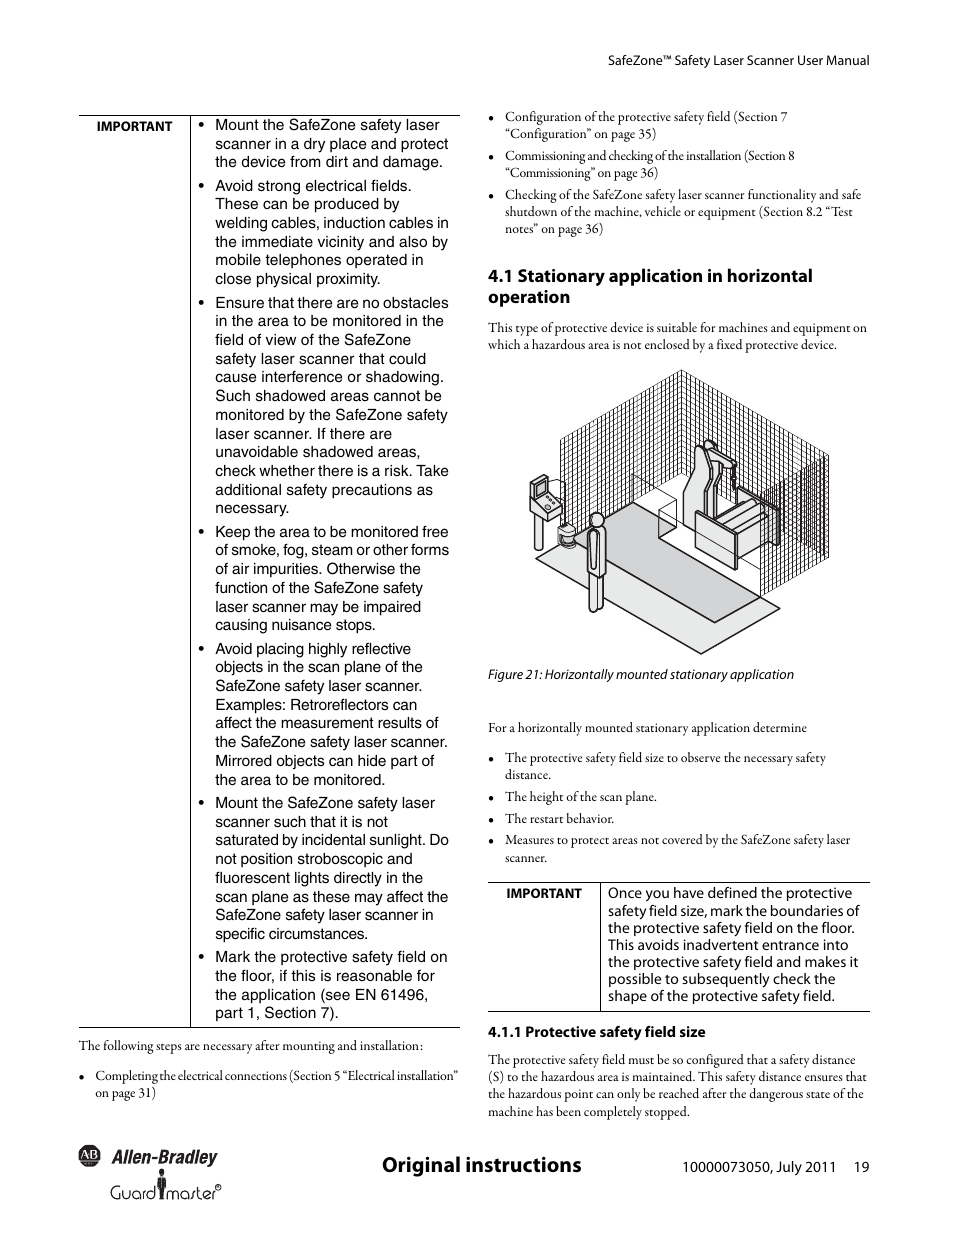 Original instructions, 1 stationary application in horizontal operation | Rockwell Automation 442L SafeZone Singlezone & Multizone Safety Laser Scanner User Manual | Page 21 / 60